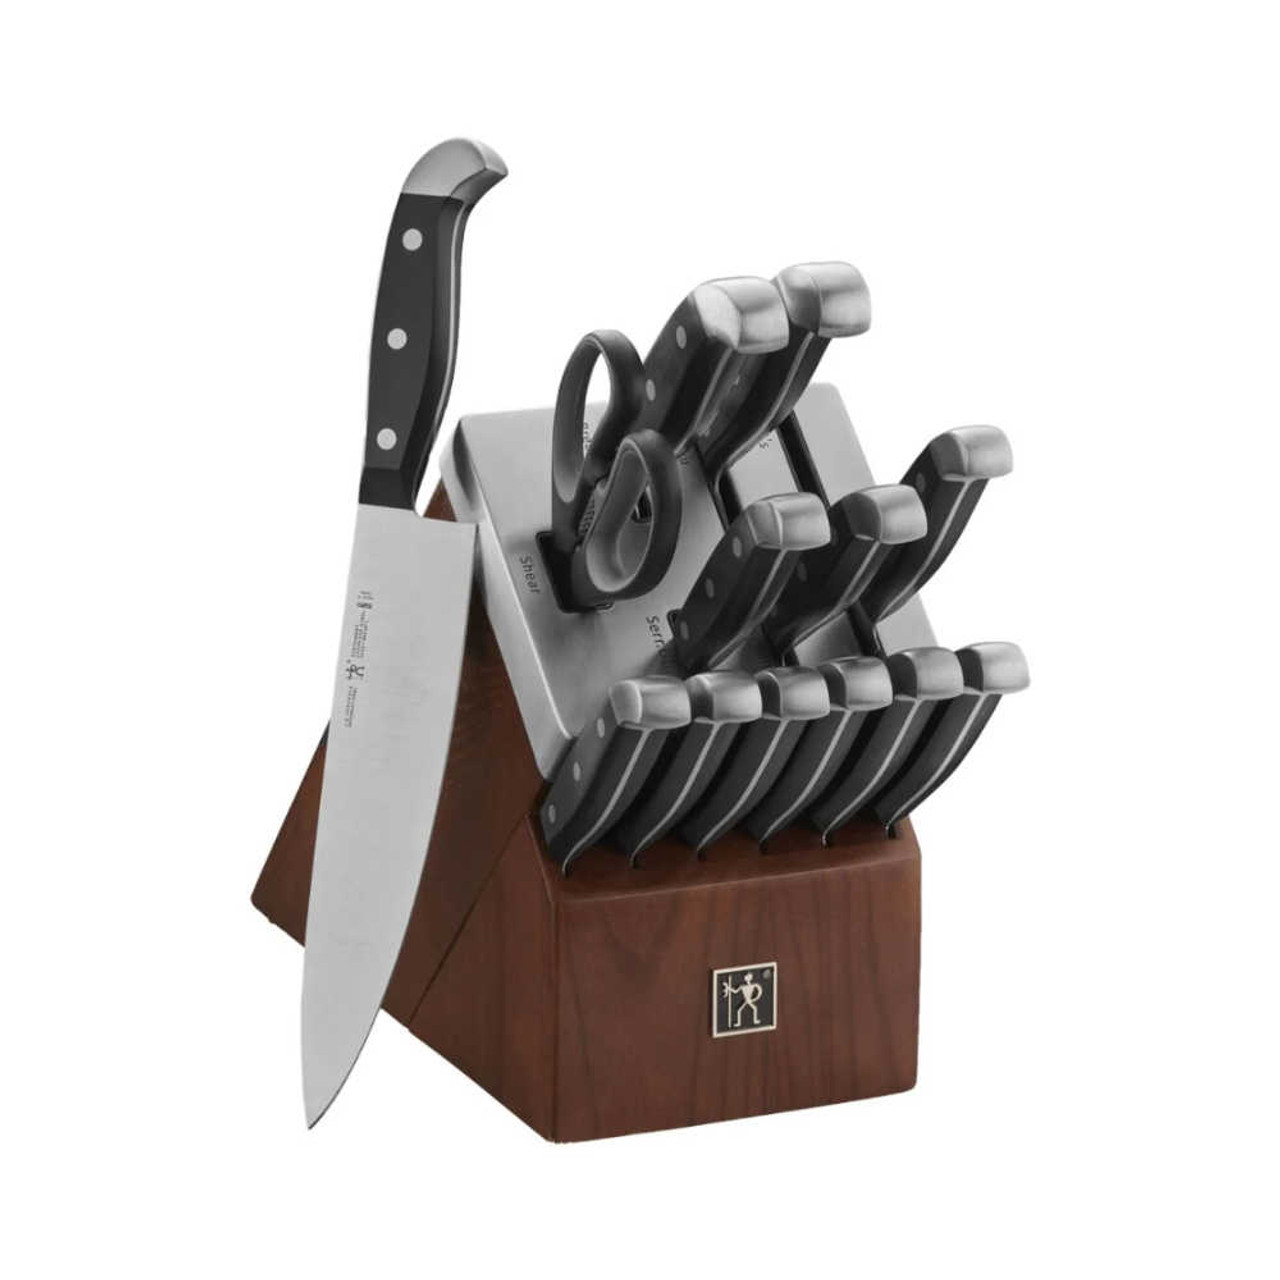 https://cdn11.bigcommerce.com/s-hccytny0od/images/stencil/1280x1280/products/5177/22366/Henckels_Statement_14-Piece_Self-Sharpening_Knife_Block_Set__13931.1668891824.jpg?c=2?imbypass=on